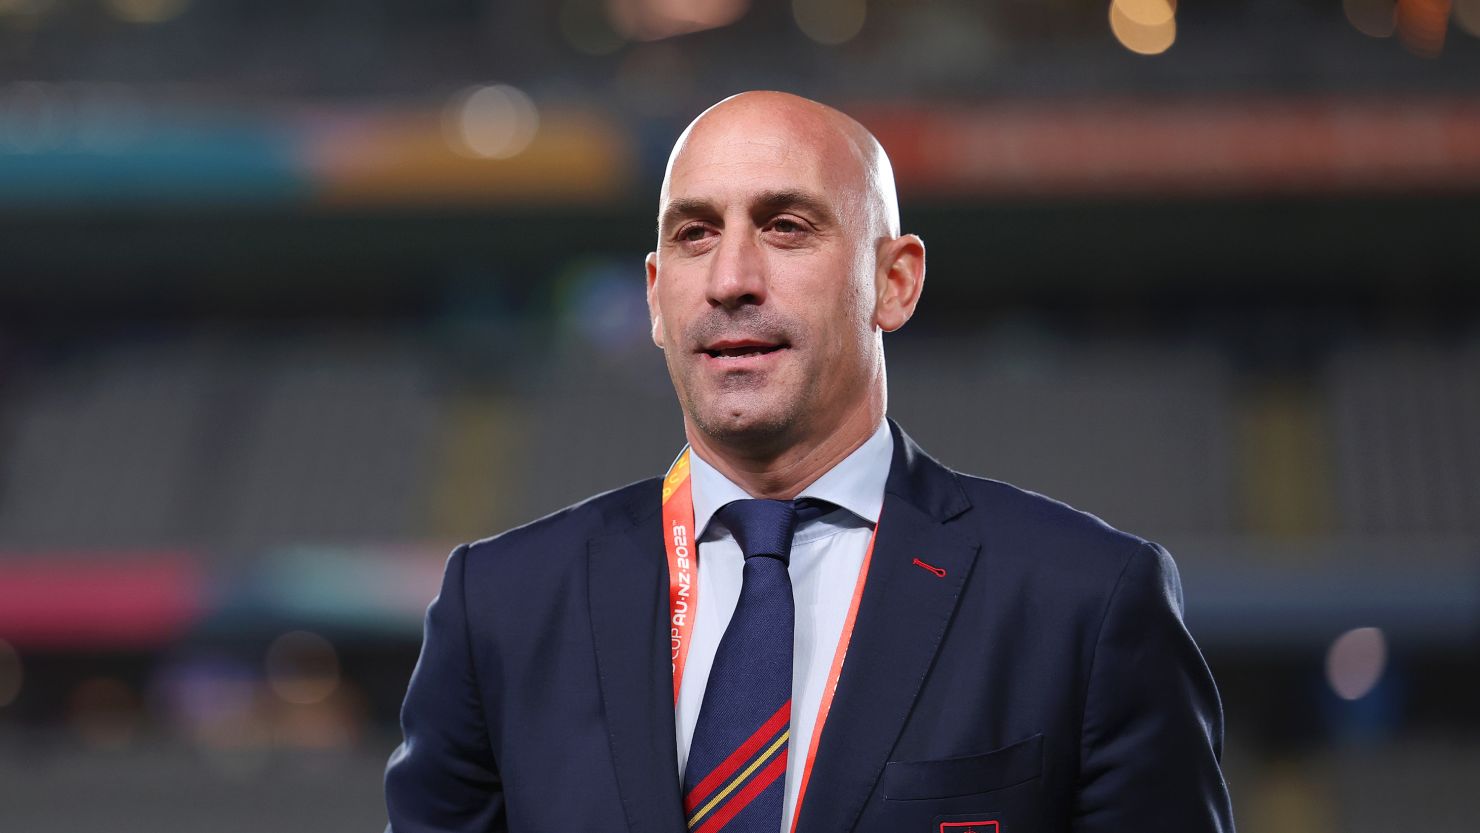 Luis Rubiales Former Spanish soccer boss detained and released by